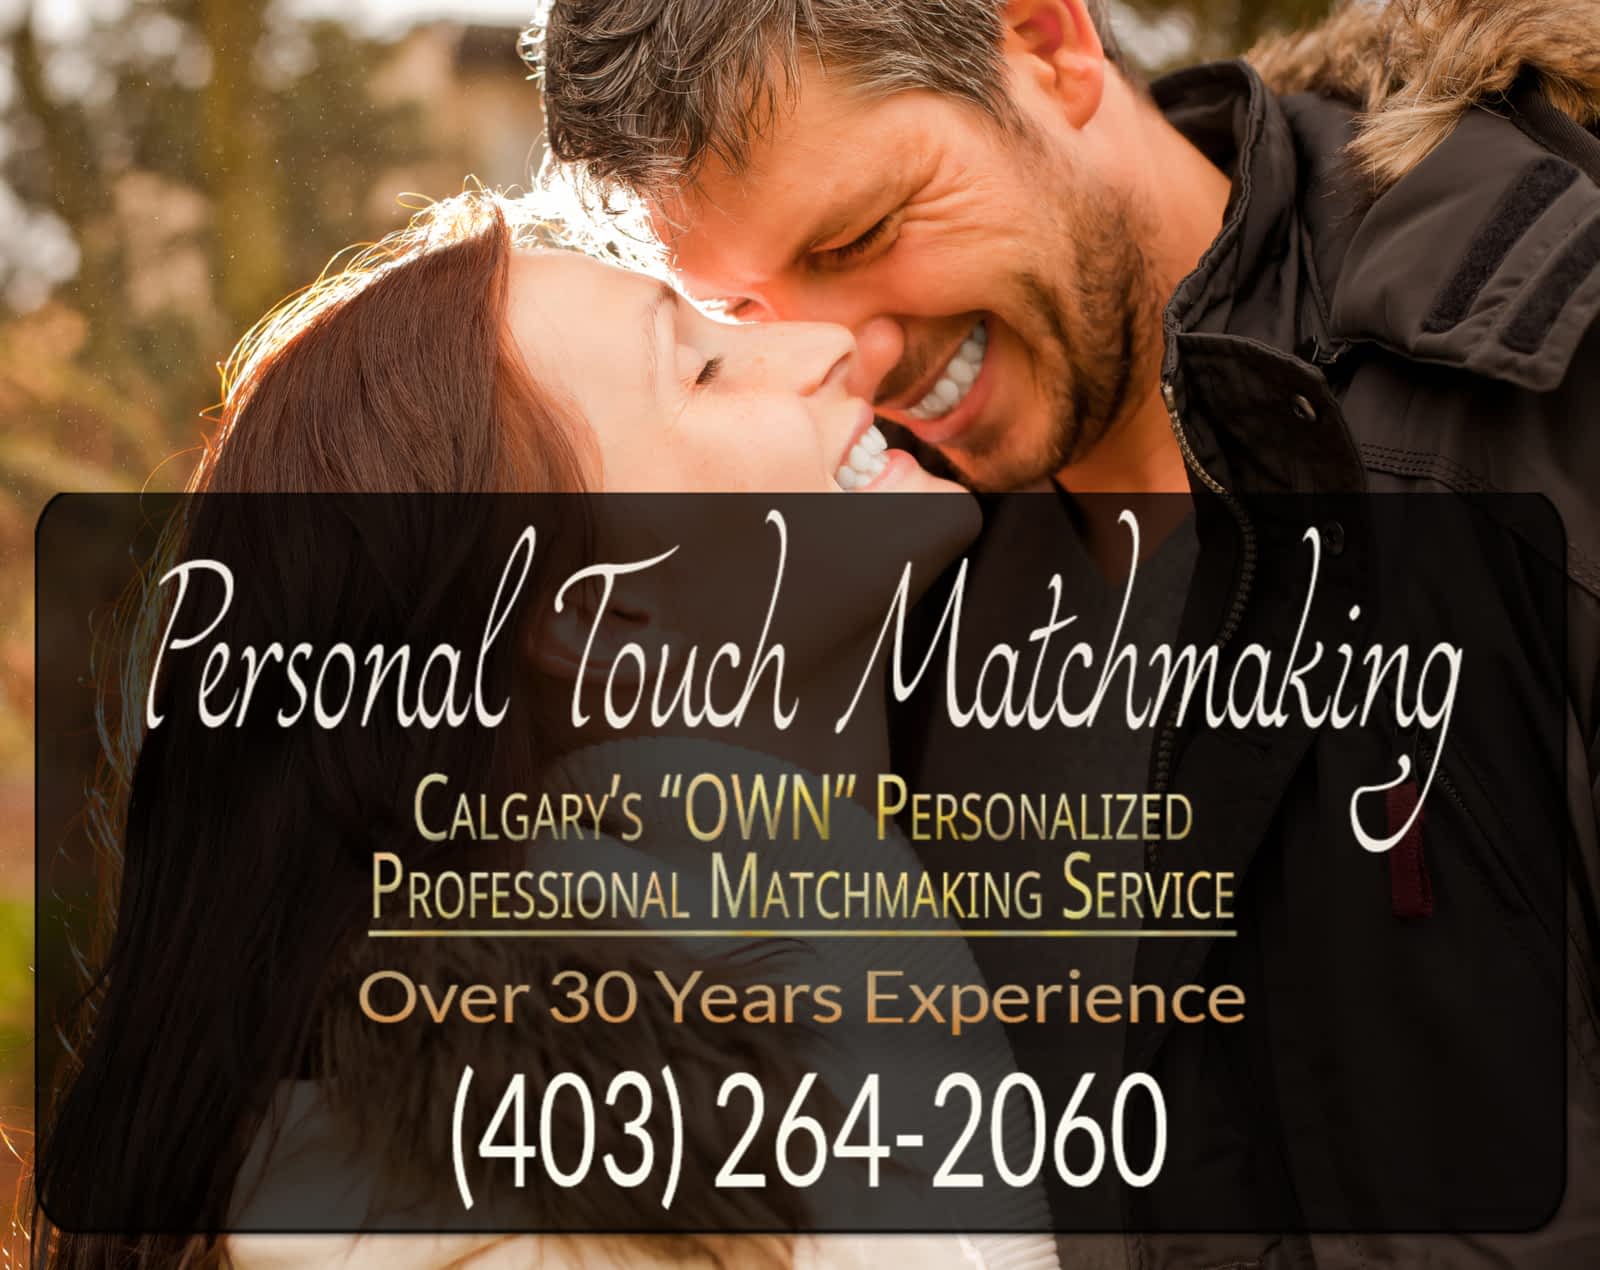 Luxe matchmaking dating service